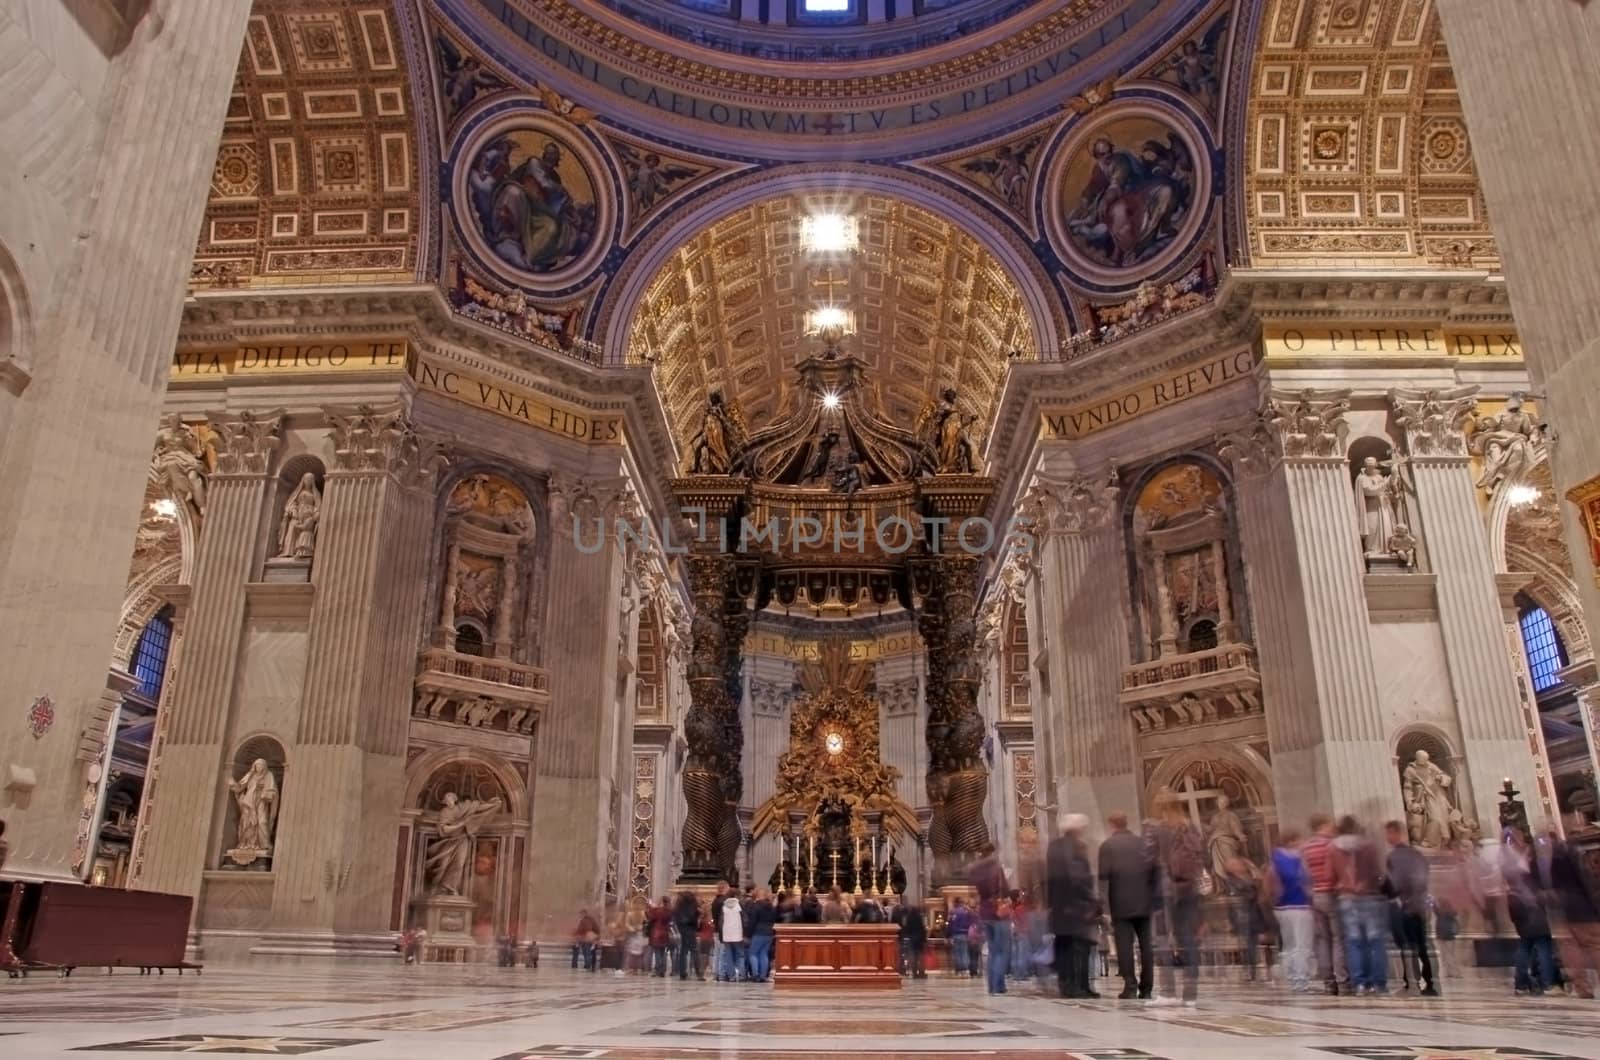 ROME, ITALY - MARCH 07:  Inside Saint Peter's Basilica view with Saint Peter's Baldachin by Bernini on March 07, 2011 in Rome, Italy